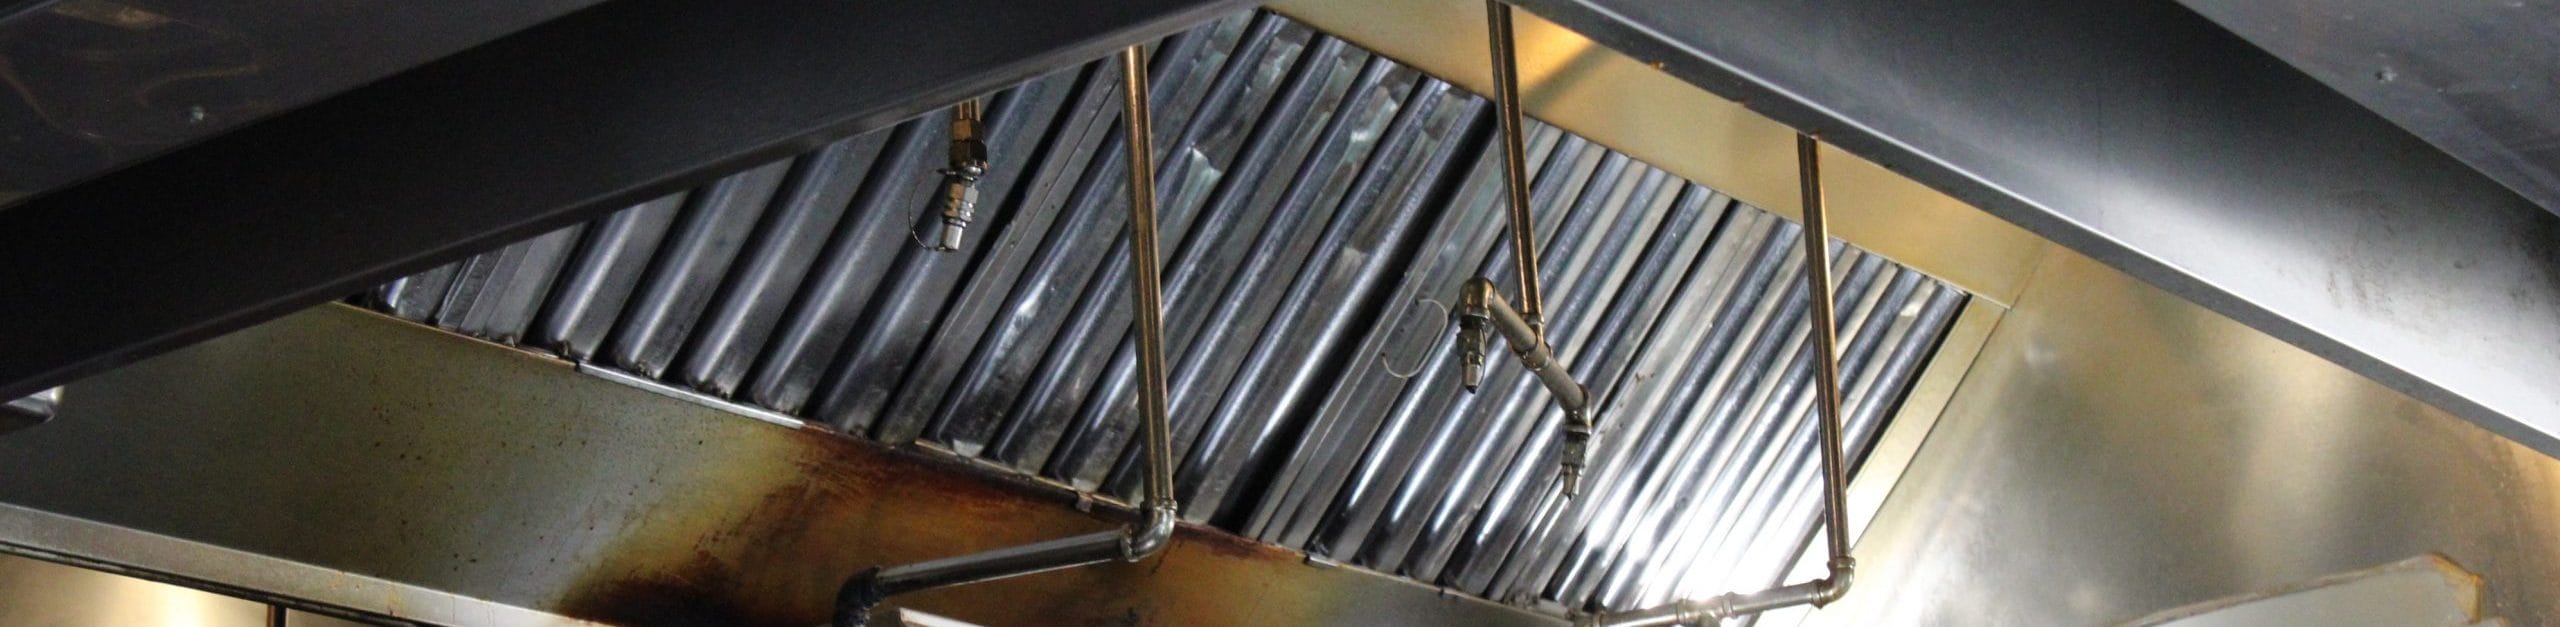 Closeup image of pipes of a kitchen vent system